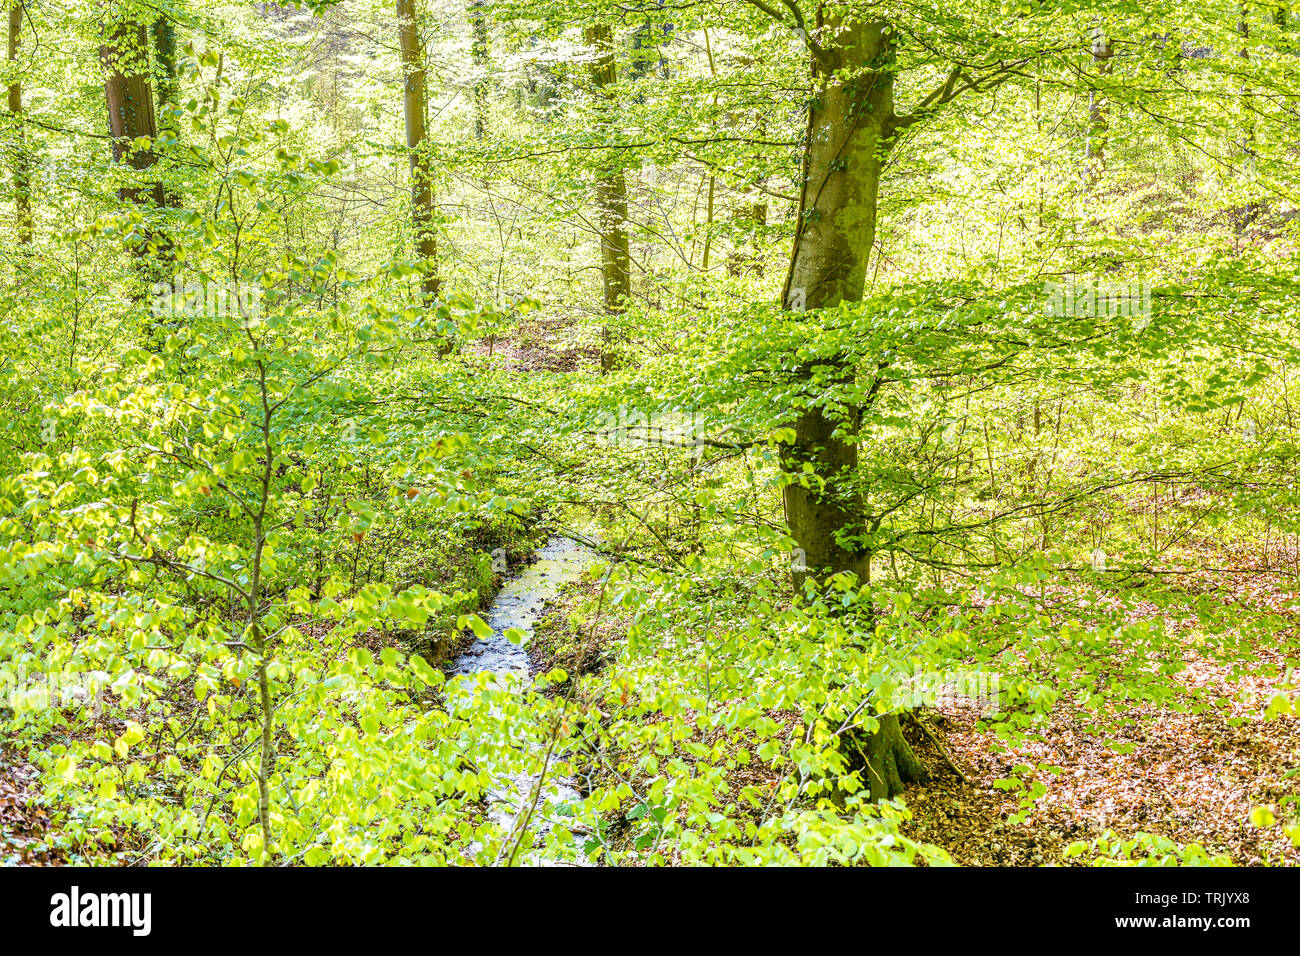 Beech forest scene with a brook in spring Stock Photo